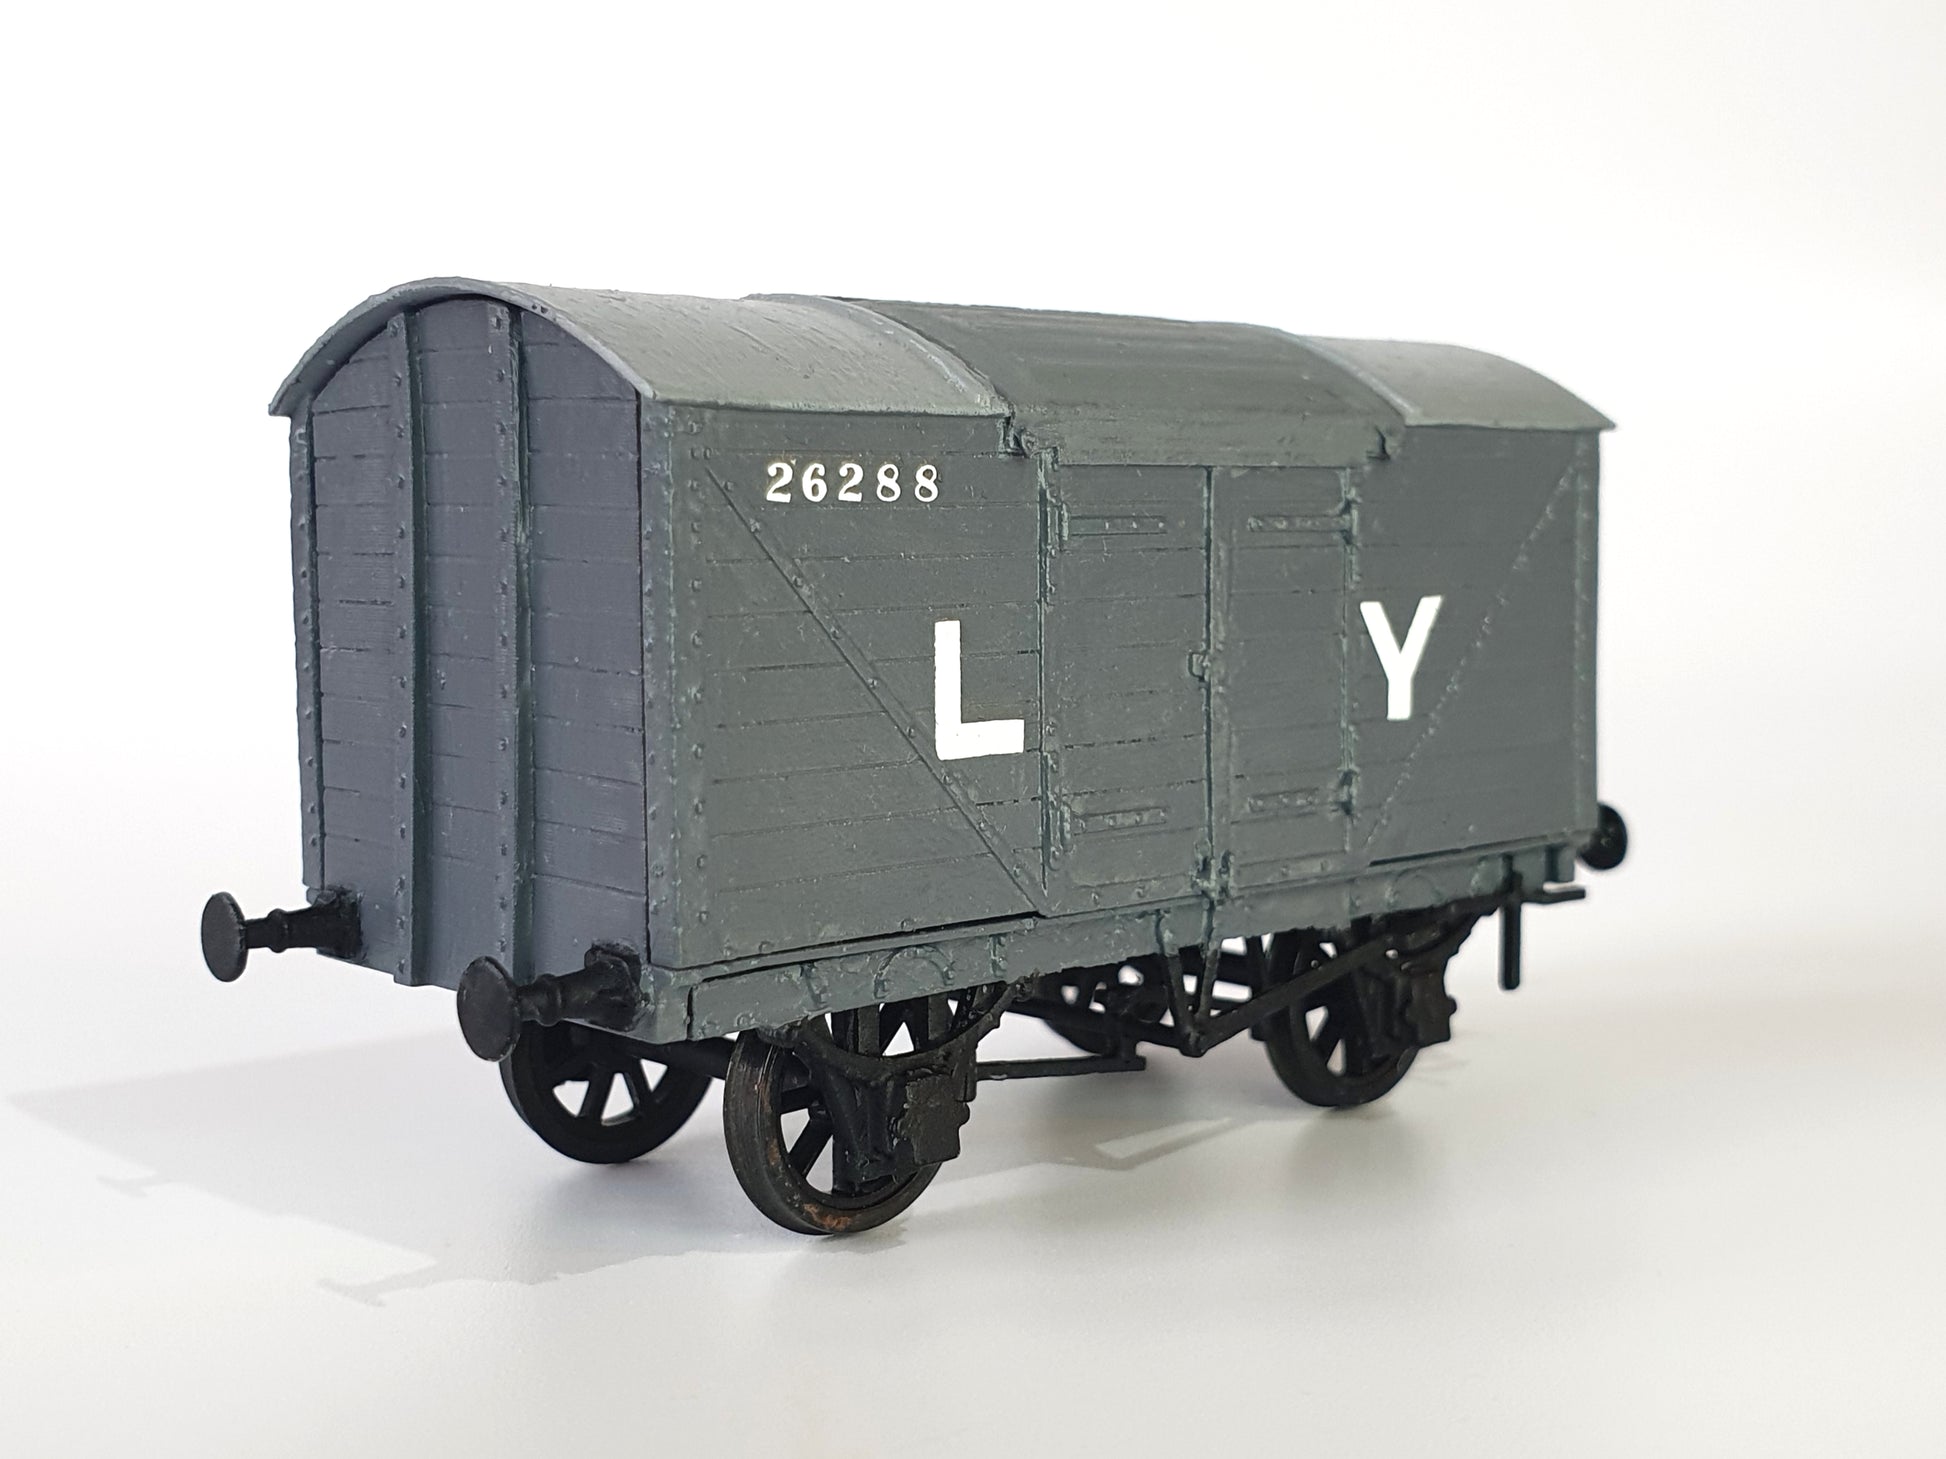 Painted OO (1:76) scale model of an L&Y Diagram 3 Covered Goods wagon - Three Peaks Models